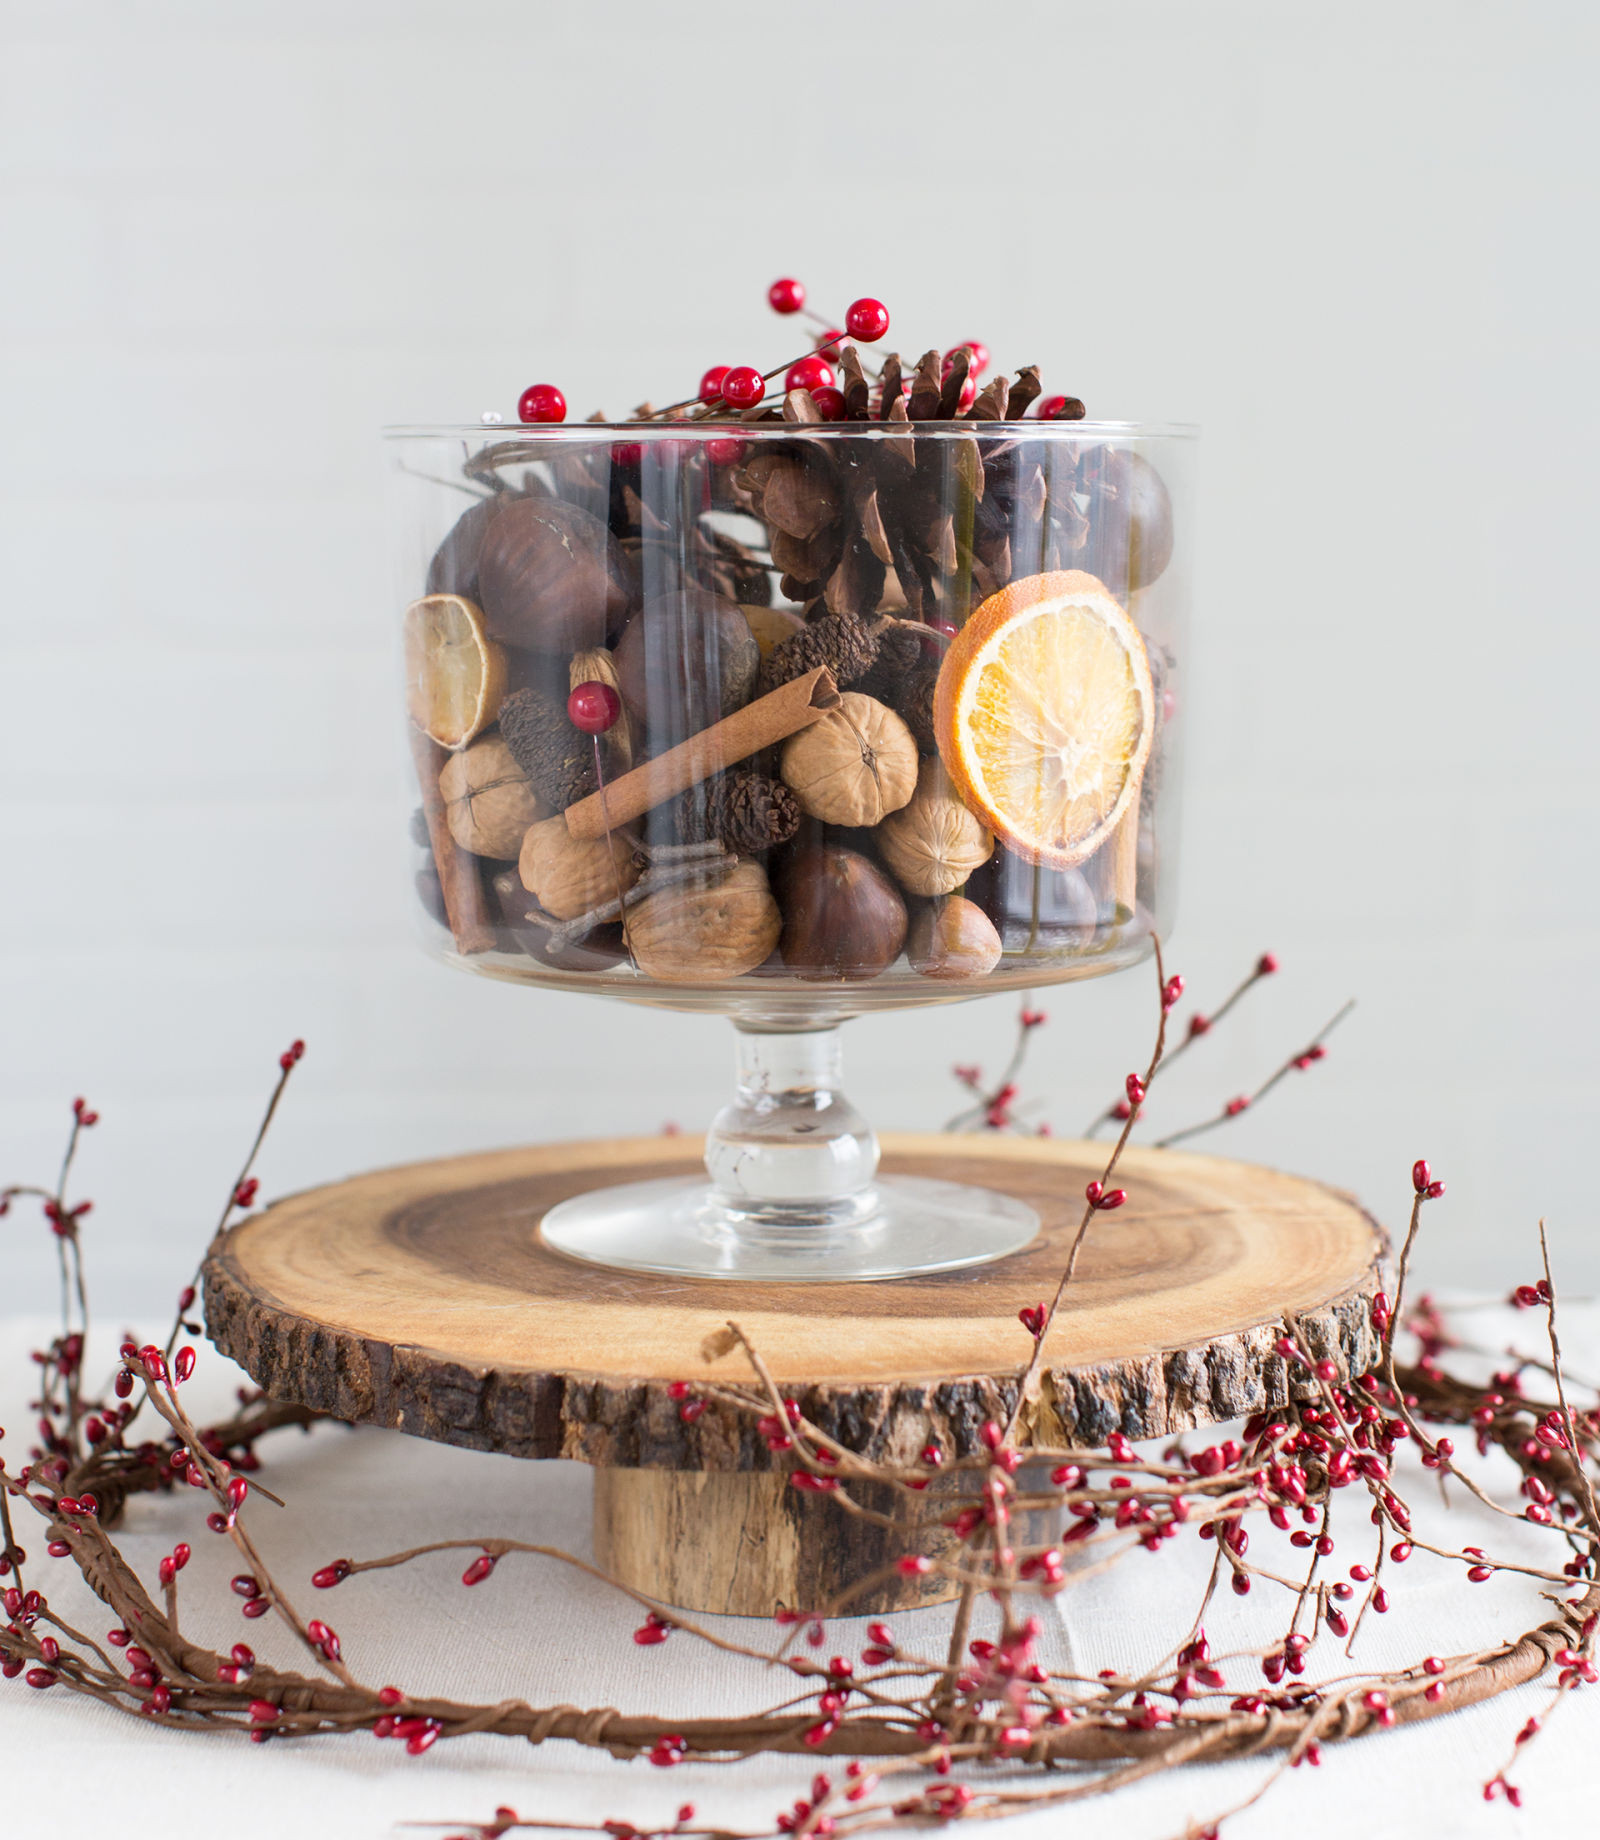 DIY Christmas Table Centerpieces
 Decorate The Tables With These 50 DIY Christmas Centerpieces